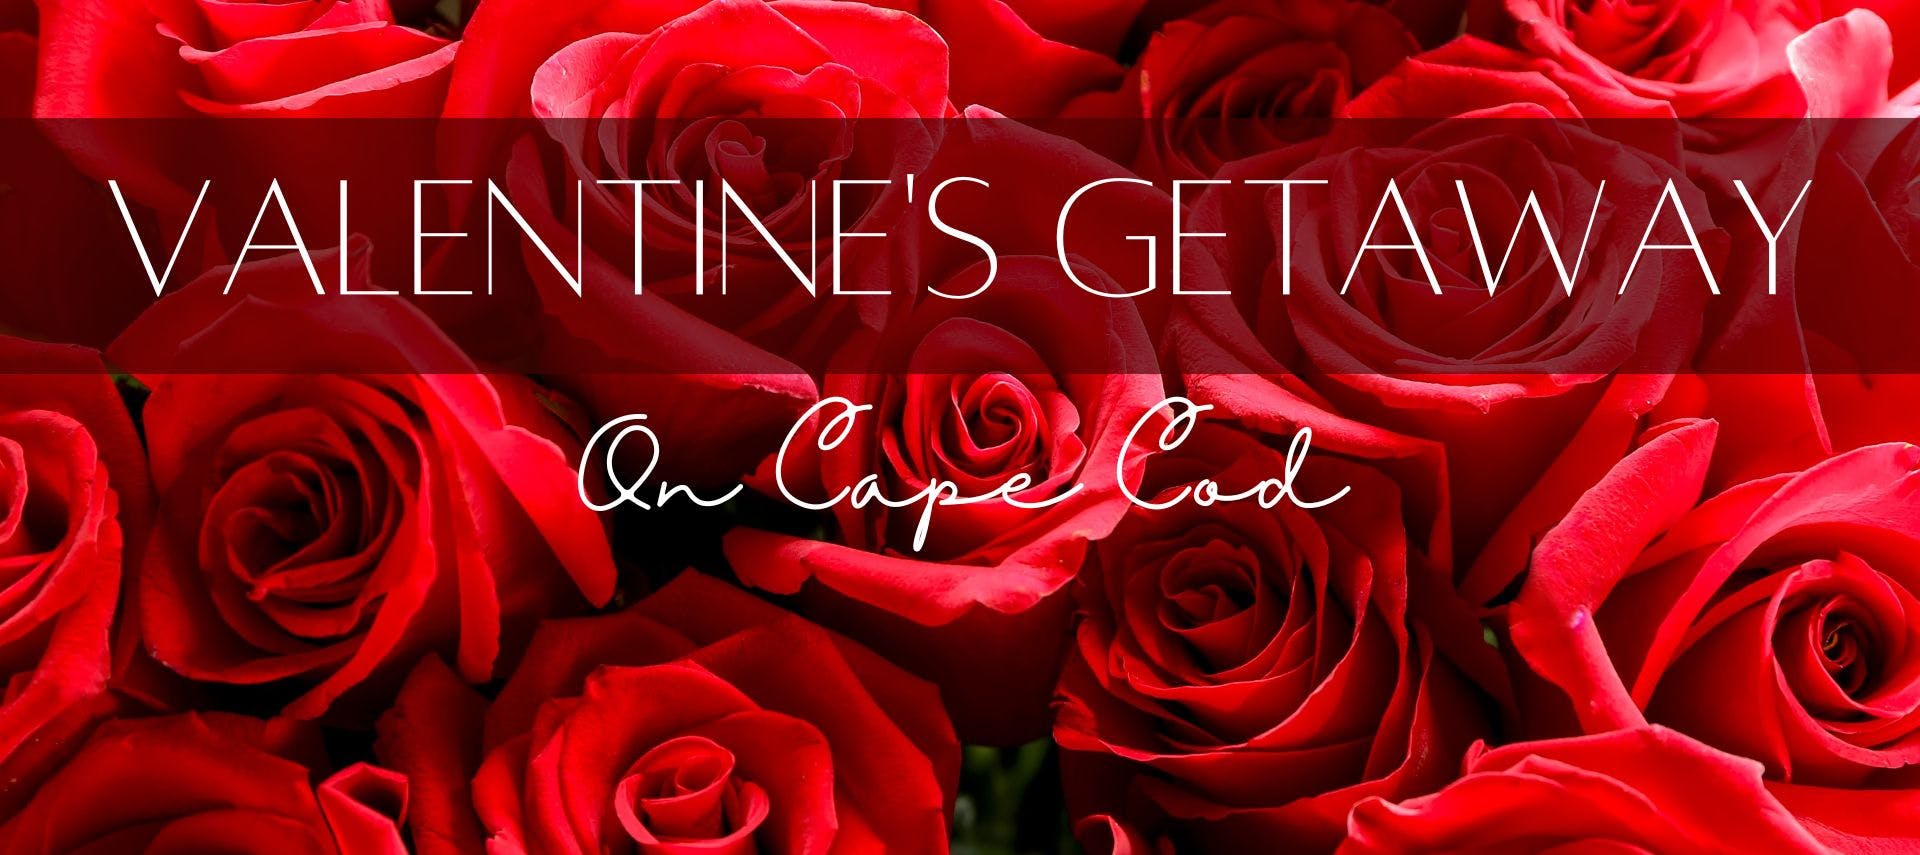 A bunch of red roses with Text Overlay "Valentines Getaway On Cape Cod".